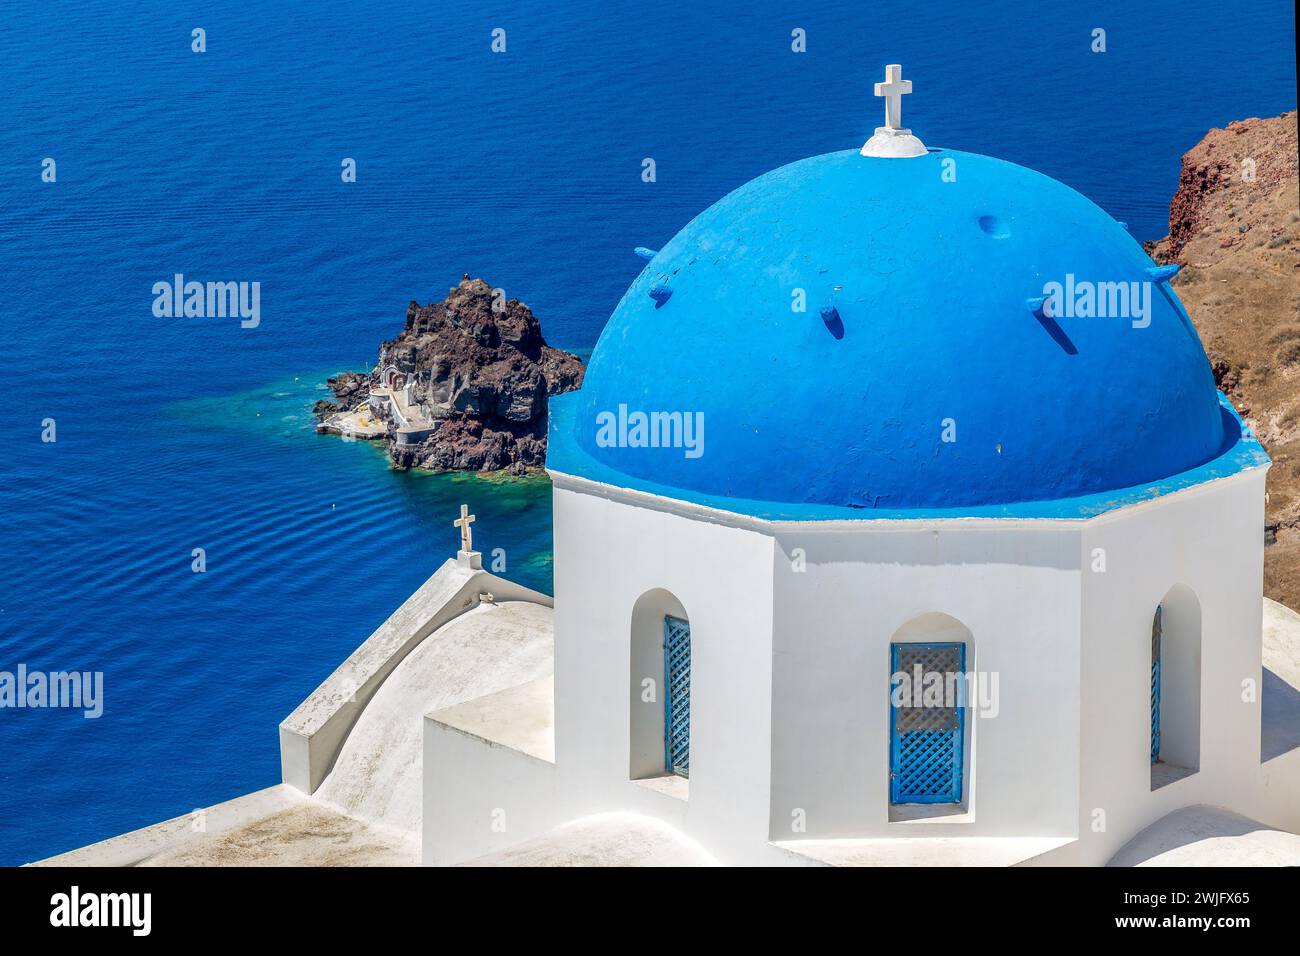 Typical white and blue architecture with domes and churches of Oia village on Santorini island, Greece. Stock Photo